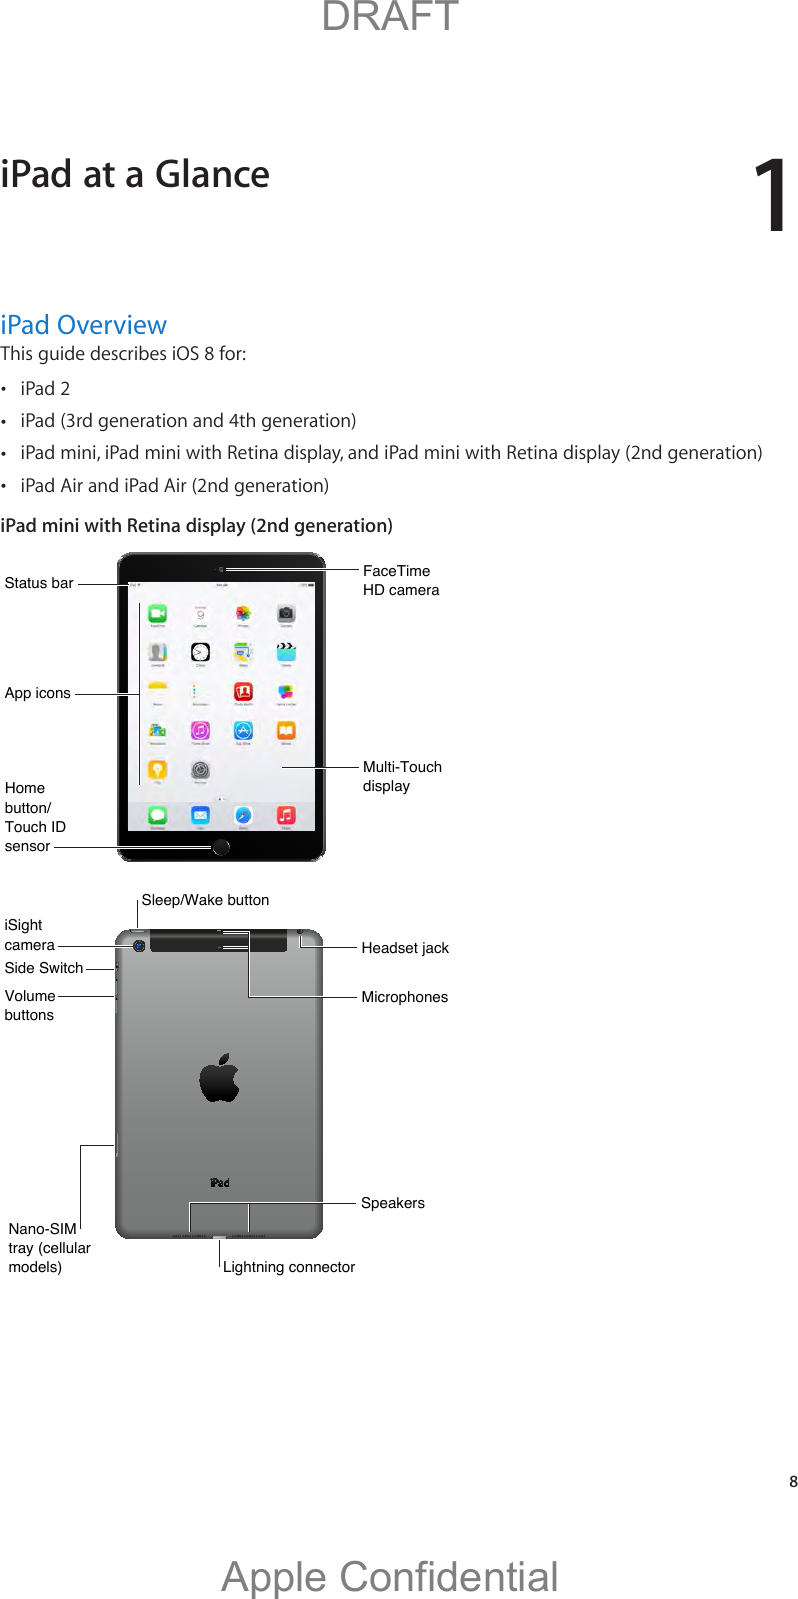 1   8iPad OverviewThis guide describes iOS 8 for: iPad 2 iPad (3rd generation and 4th generation) iPad mini, iPad mini with Retina display, and iPad mini with Retina display (2nd generation) iPad Air and iPad Air (2nd generation)iPad mini with Retina display (2nd generation)Multi-TouchdisplayMulti-TouchdisplayFaceTimeHD cameraFaceTimeHD cameraApp iconsApp iconsStatus barStatus barHome button/Touch ID sensorHome button/Touch ID sensorLightning connectorLightning connectorSpeakersSpeakersHeadset jackHeadset jackSleep/Wake buttonSleep/Wake buttoniSightcameraiSightcameraVolumebuttonsVolumebuttonsNano-SIM tray (cellular models)Nano-SIM tray (cellular models)Side SwitchSide SwitchMicrophonesMicrophonesiPad at a Glance          DRAFTApple Confidential